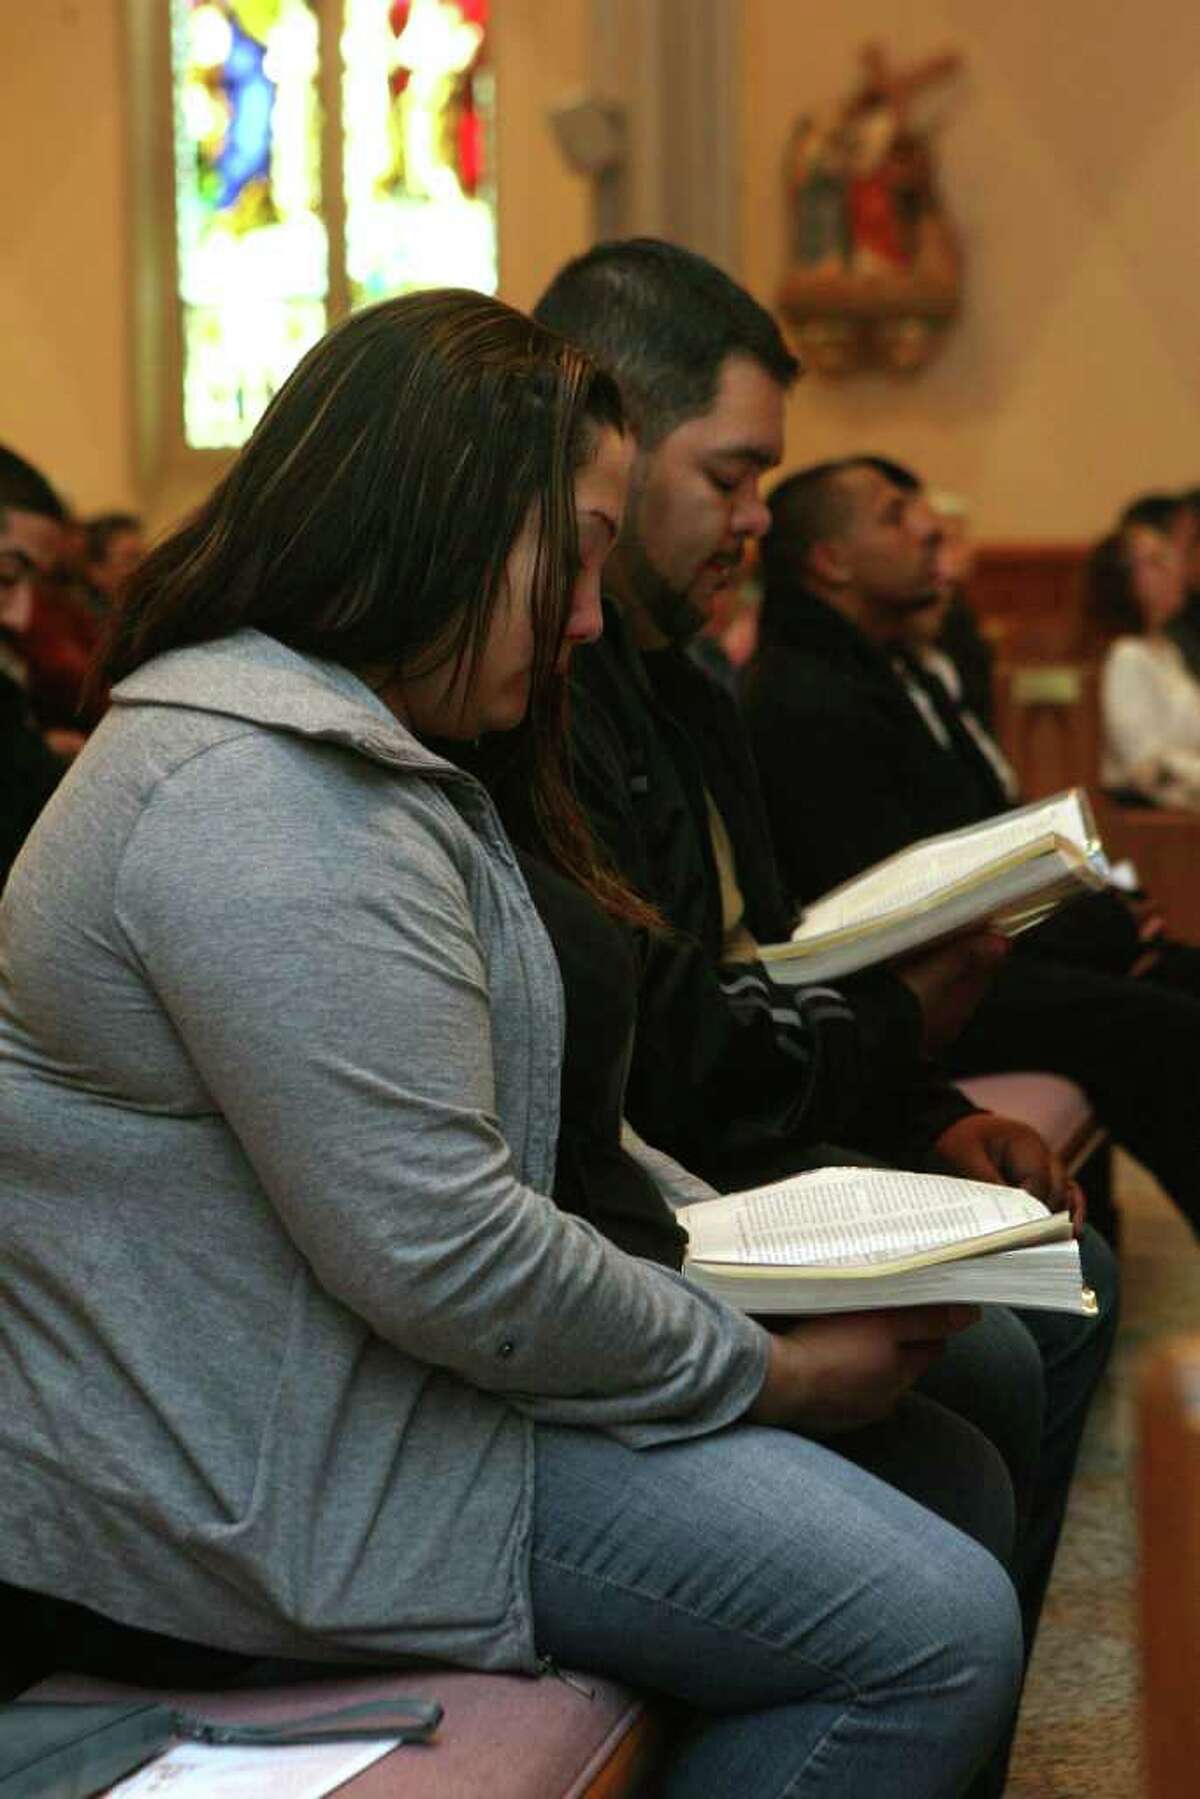 Nicole and Miguel Arbelo, of Bridgeport, attend mass at St. Augustine's Cathedral on Sunday, November 20, 2011. The changes in the Mass liturgy will begin next Sunday.